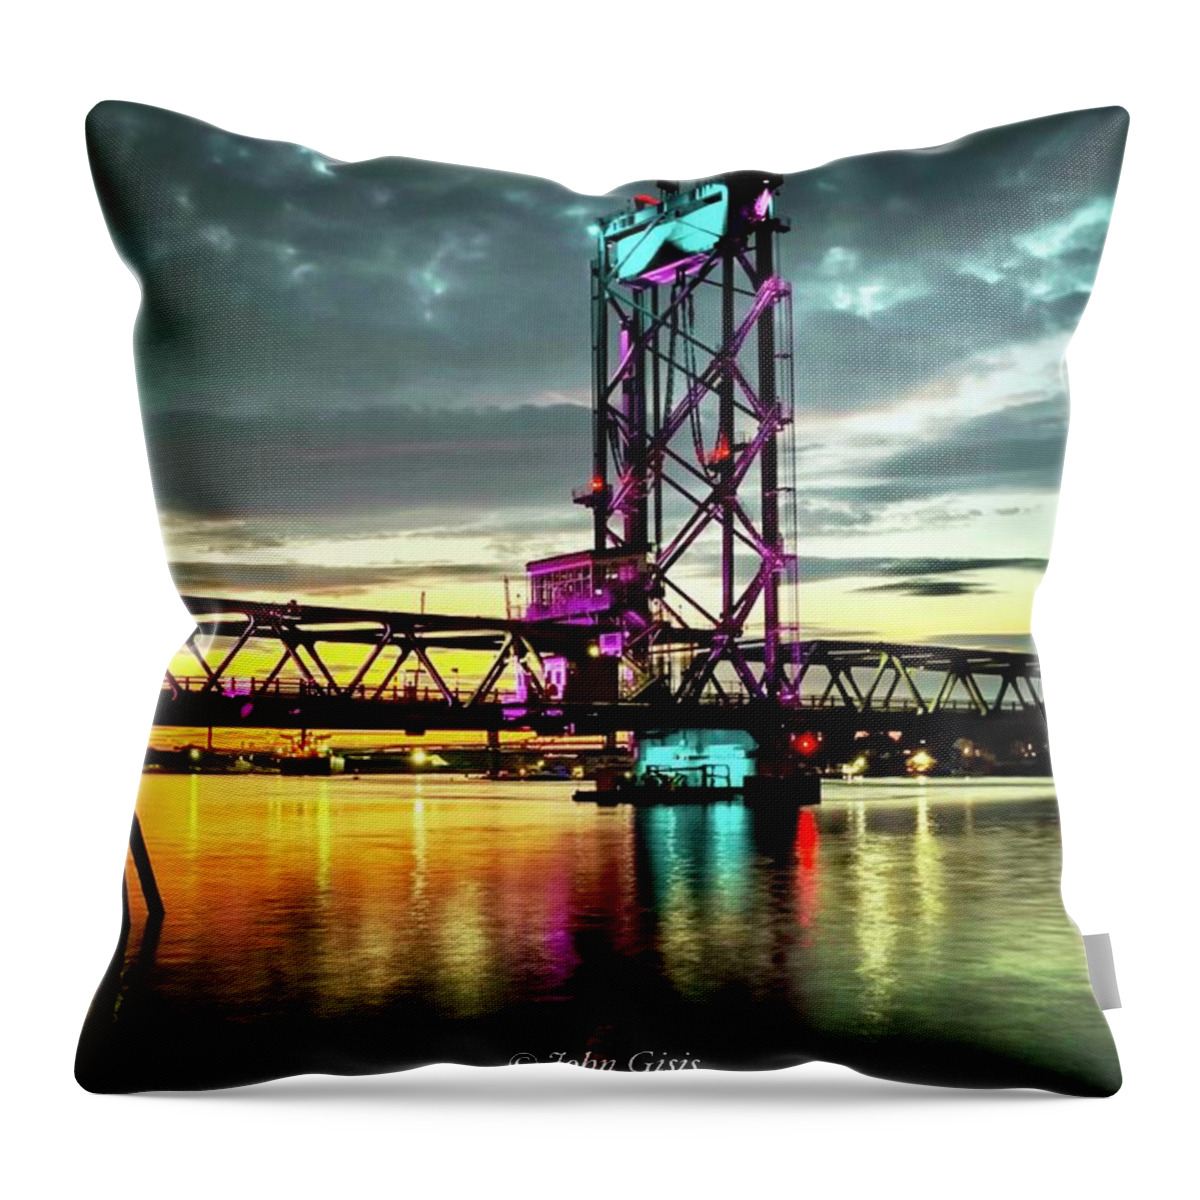  Throw Pillow featuring the photograph Portsmouth by John Gisis